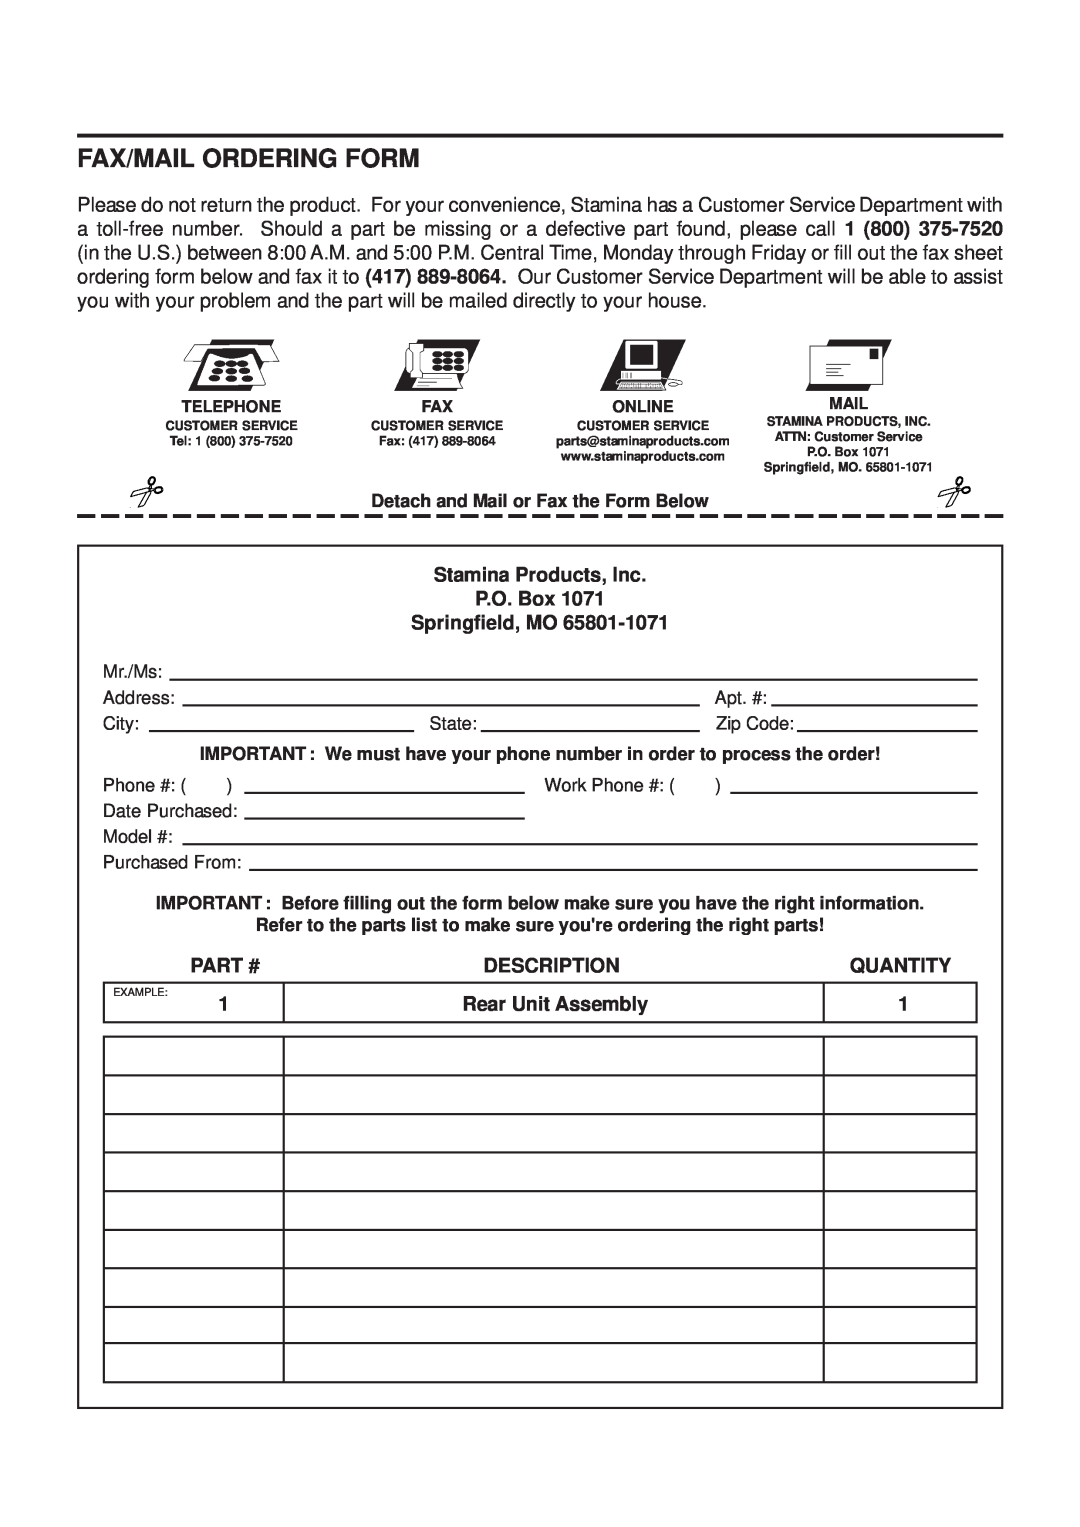 Stamina Products 55-5510 owner manual Fax/Mail Ordering Form, Stamina Products, Inc P.O. Box Springfield, MO, Description 